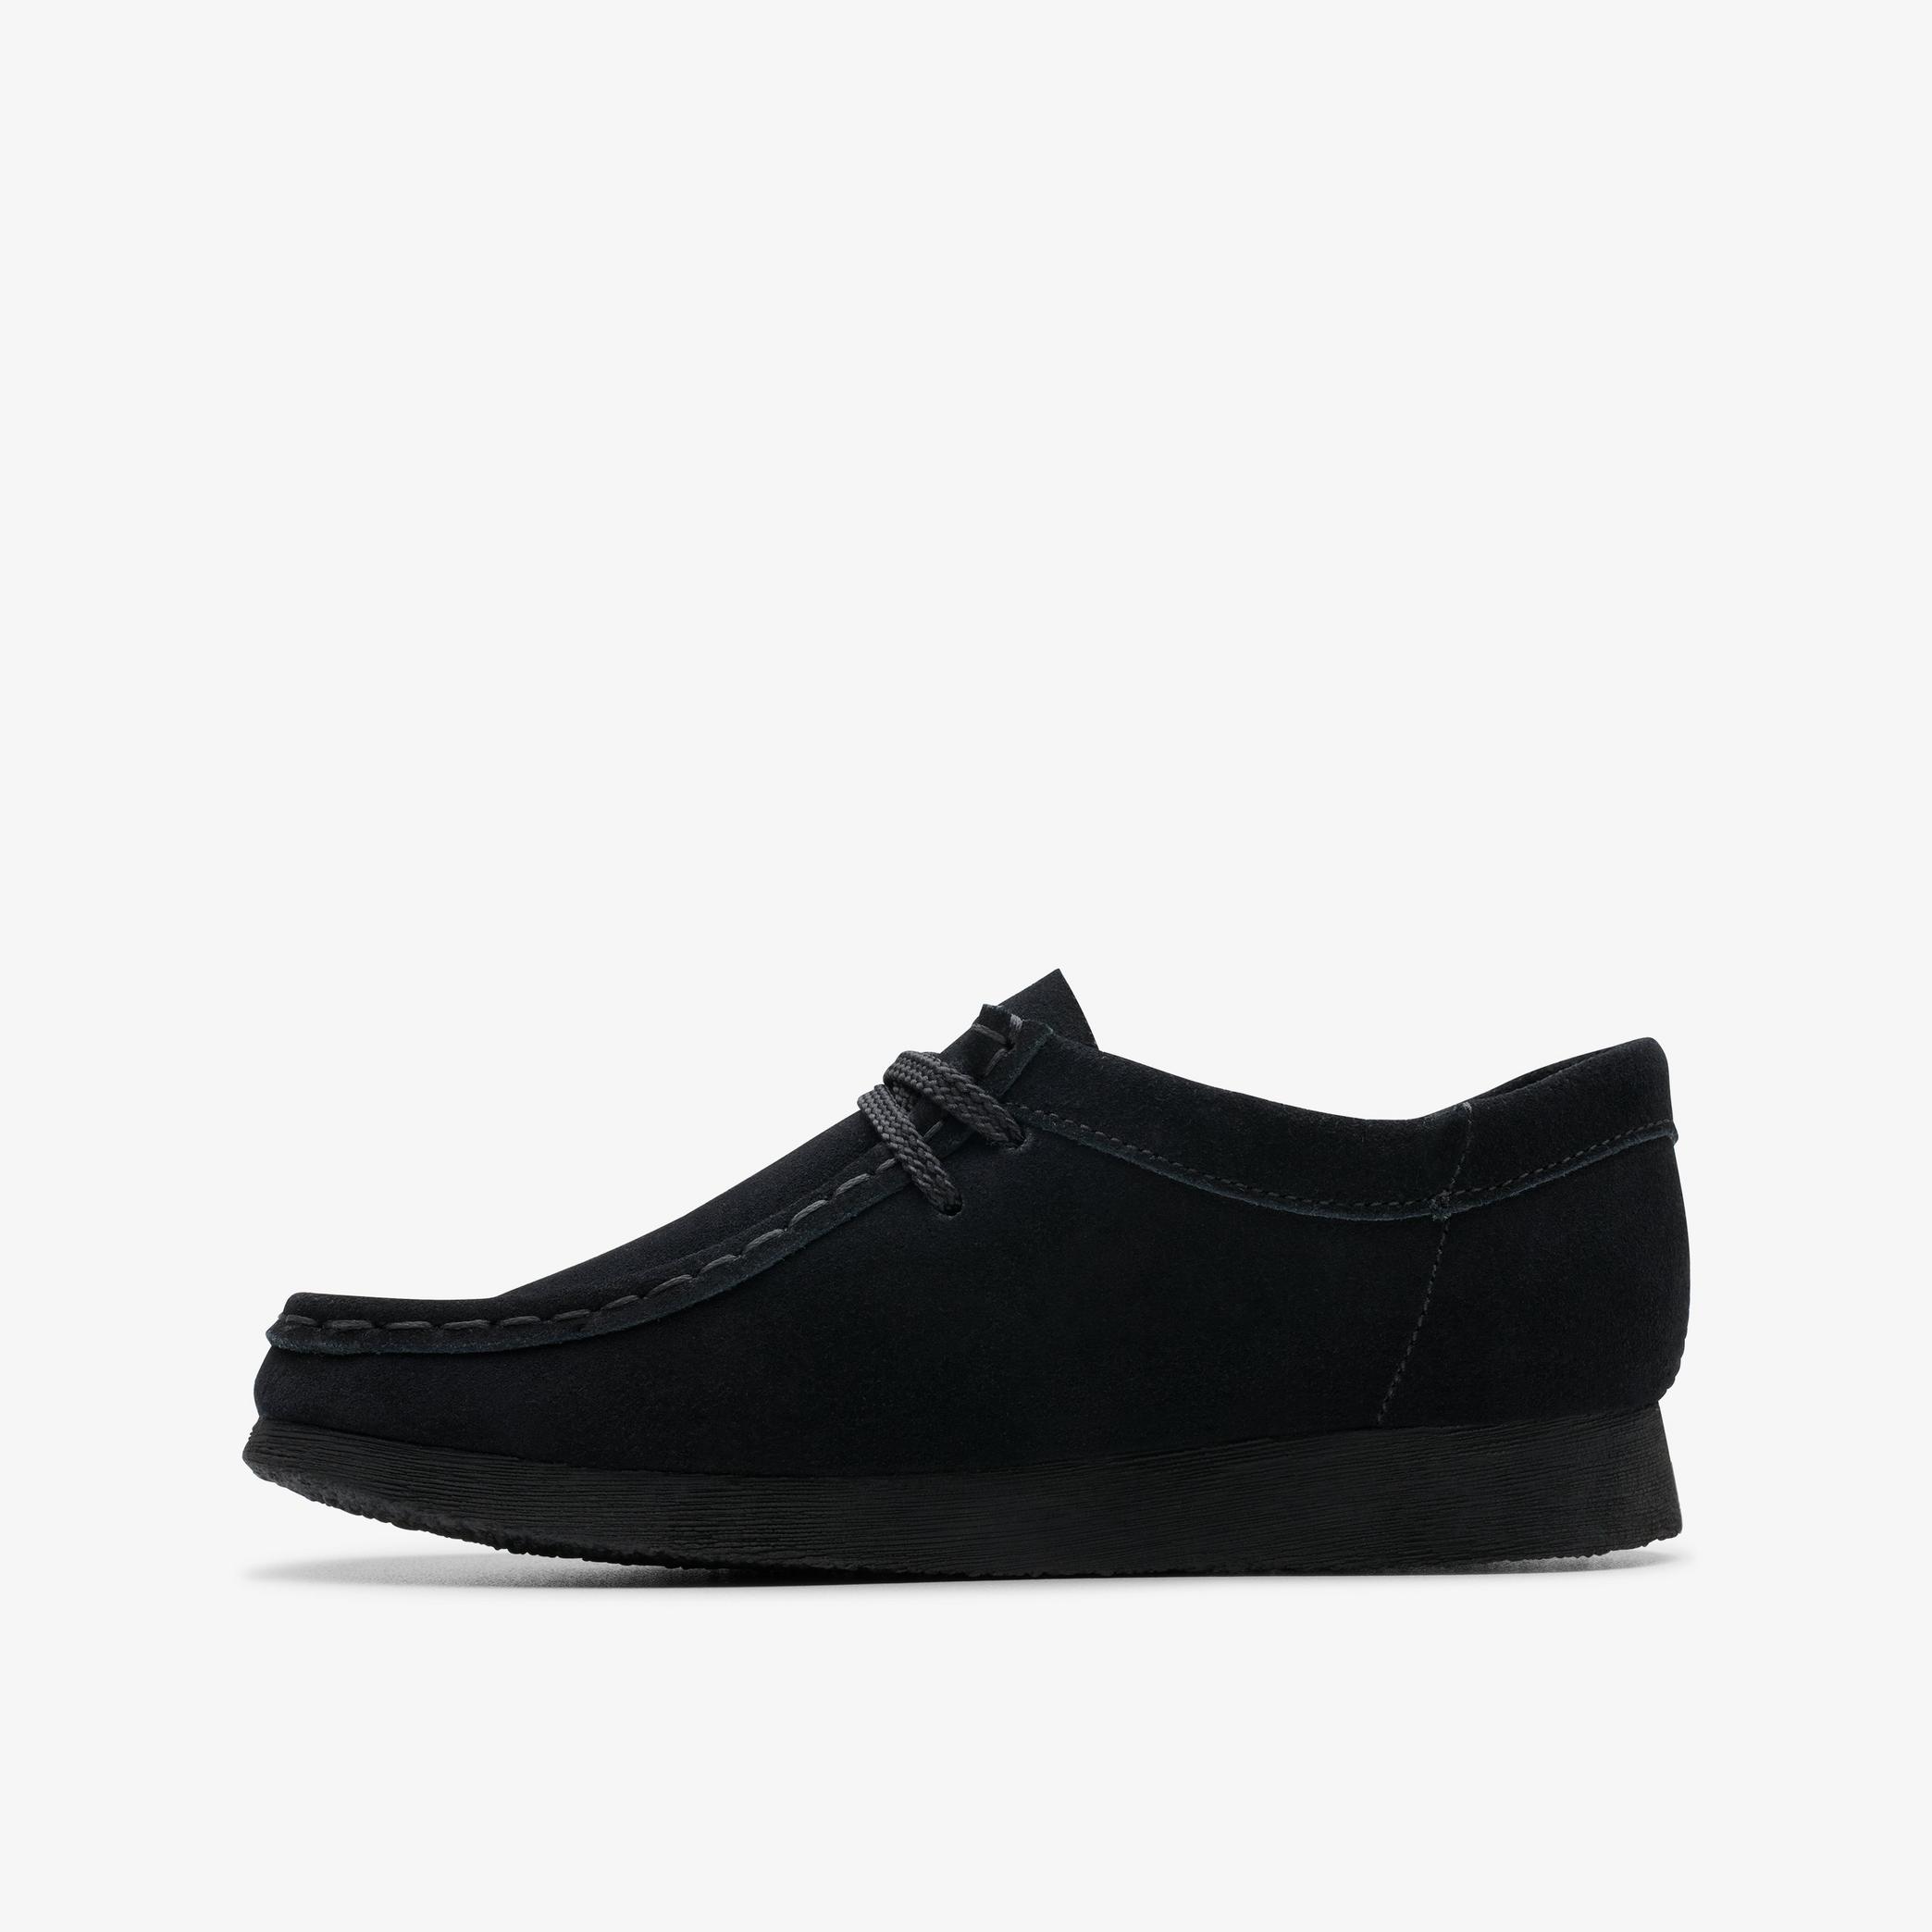 Wallabee Older Black Suede Shoes, view 2 of 6